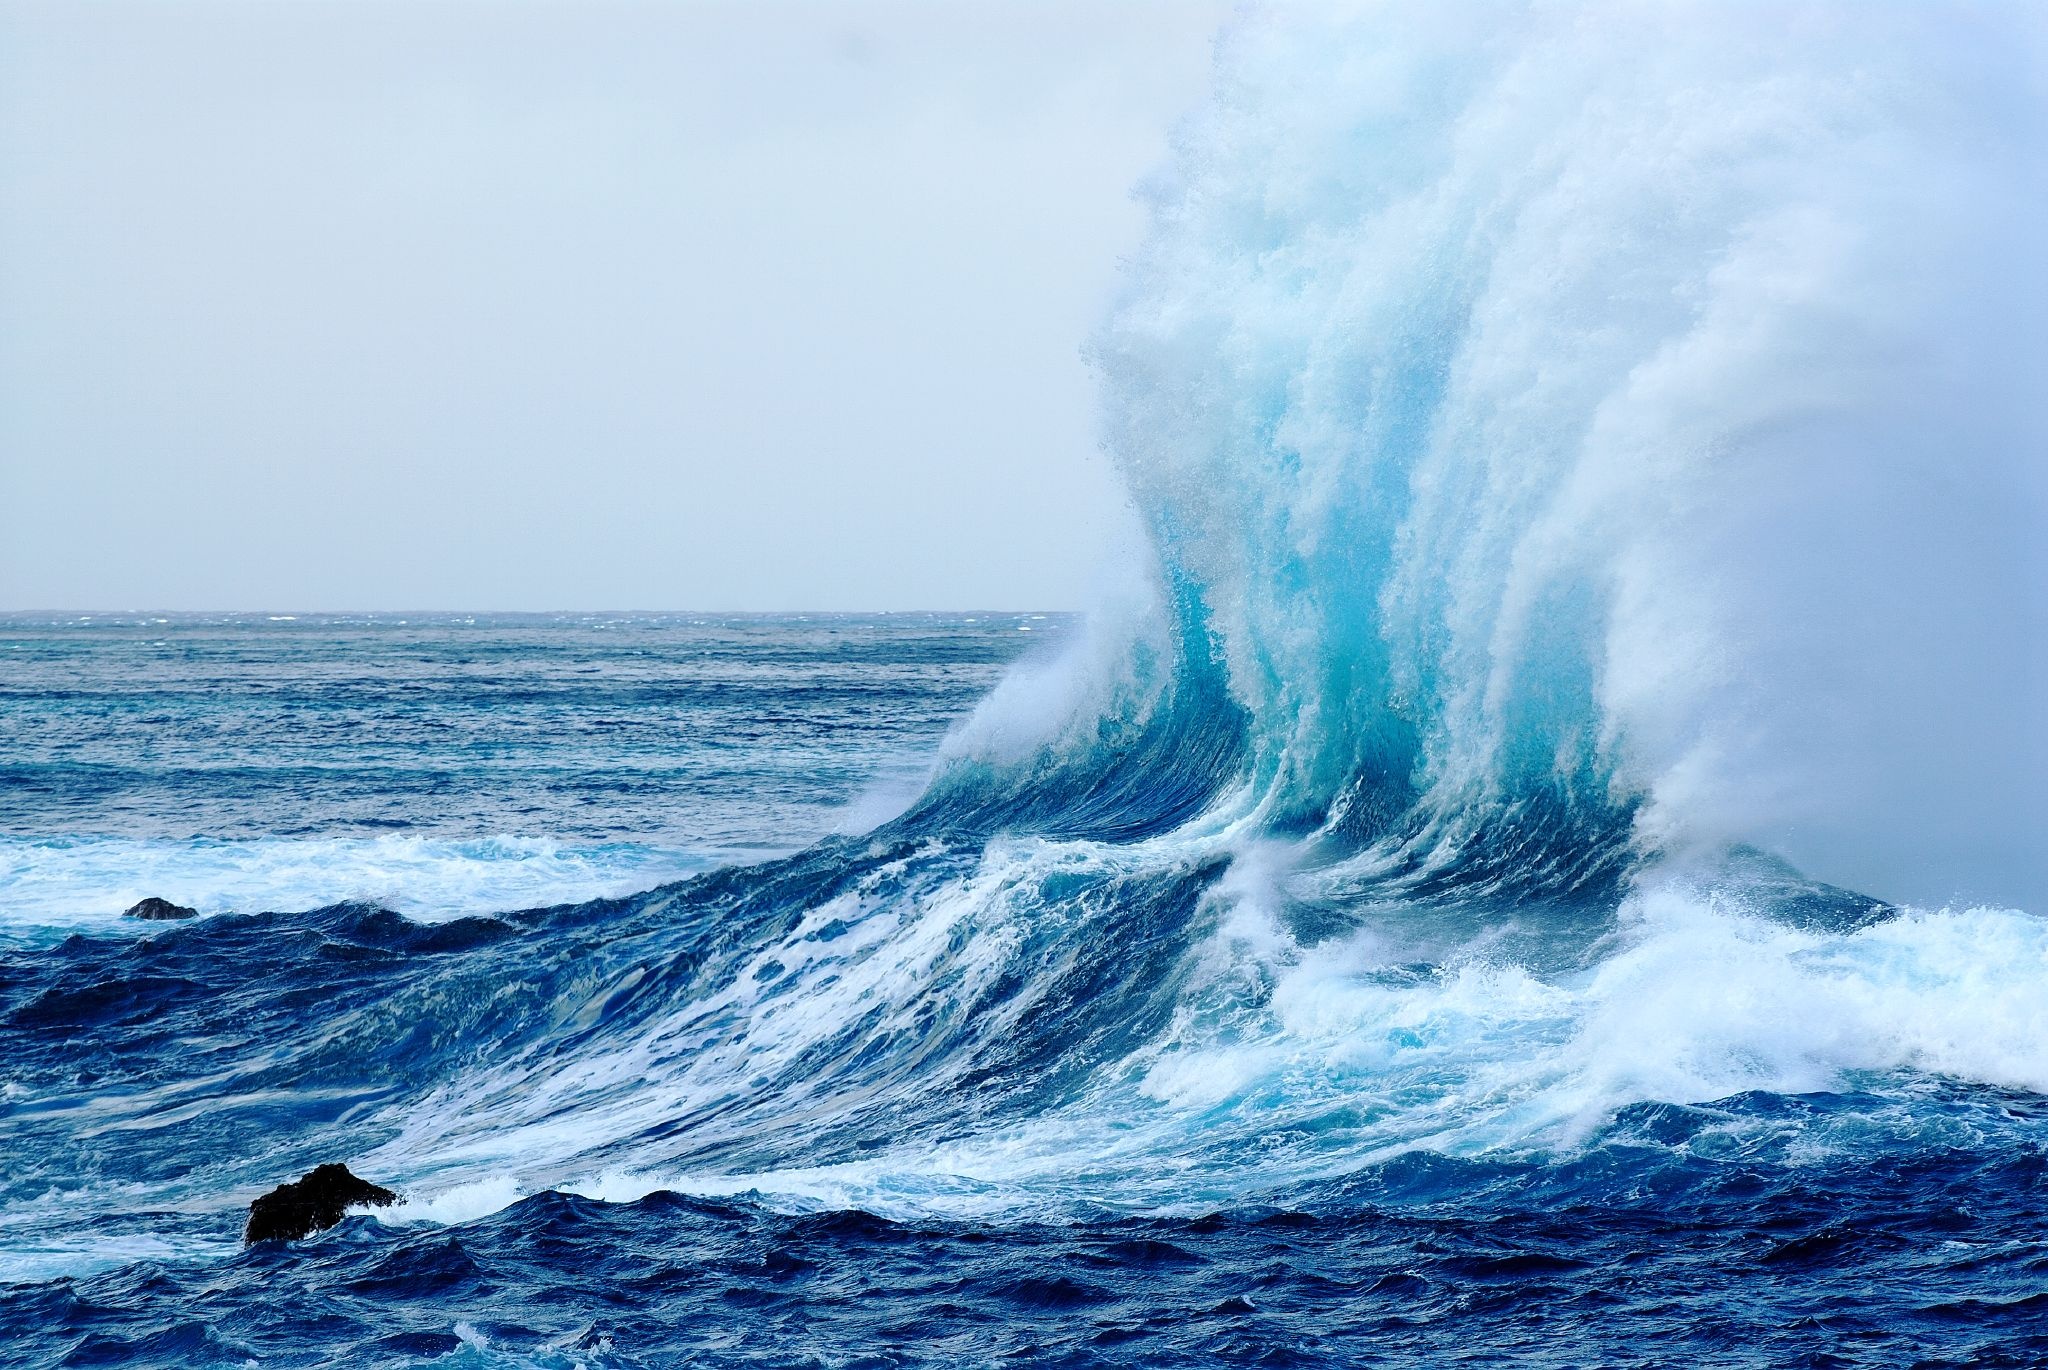 A large wave is crashing into the ocean - Ocean